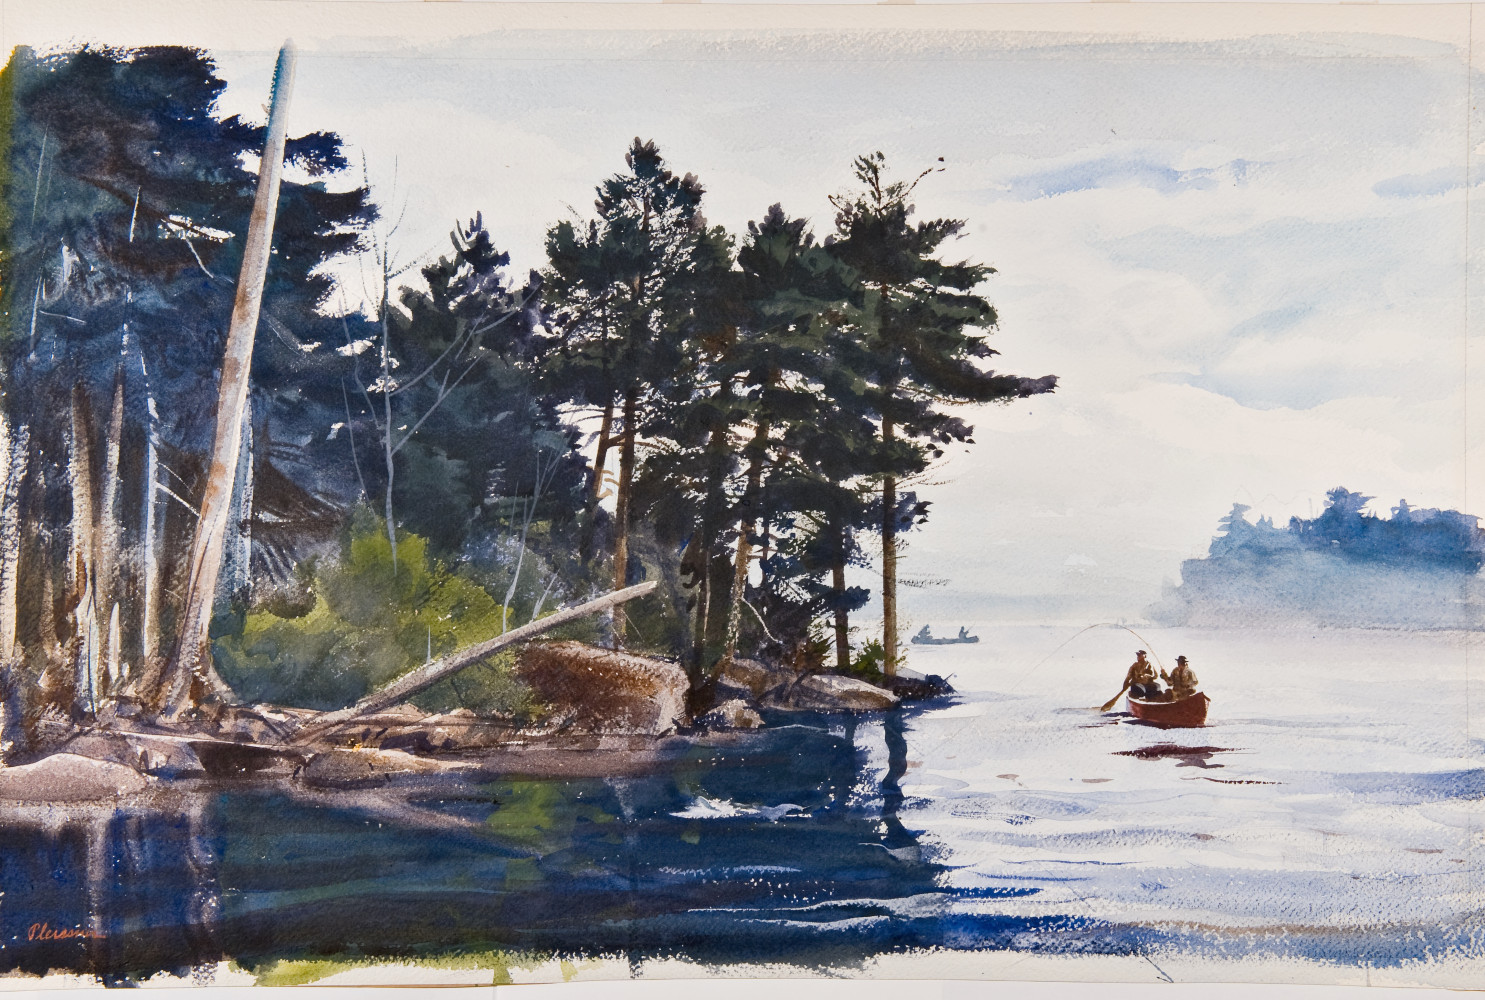 Fishing at Grand Lake Maine, 1950-1959, By Ogden M. Pleissner (American, 1905—1983); Watercolor on paper; 17 x 27 inches; Collection of Shelburne Museum, gift of Morton Quantrell. 1996-42.17. Photography by Andy Duback.